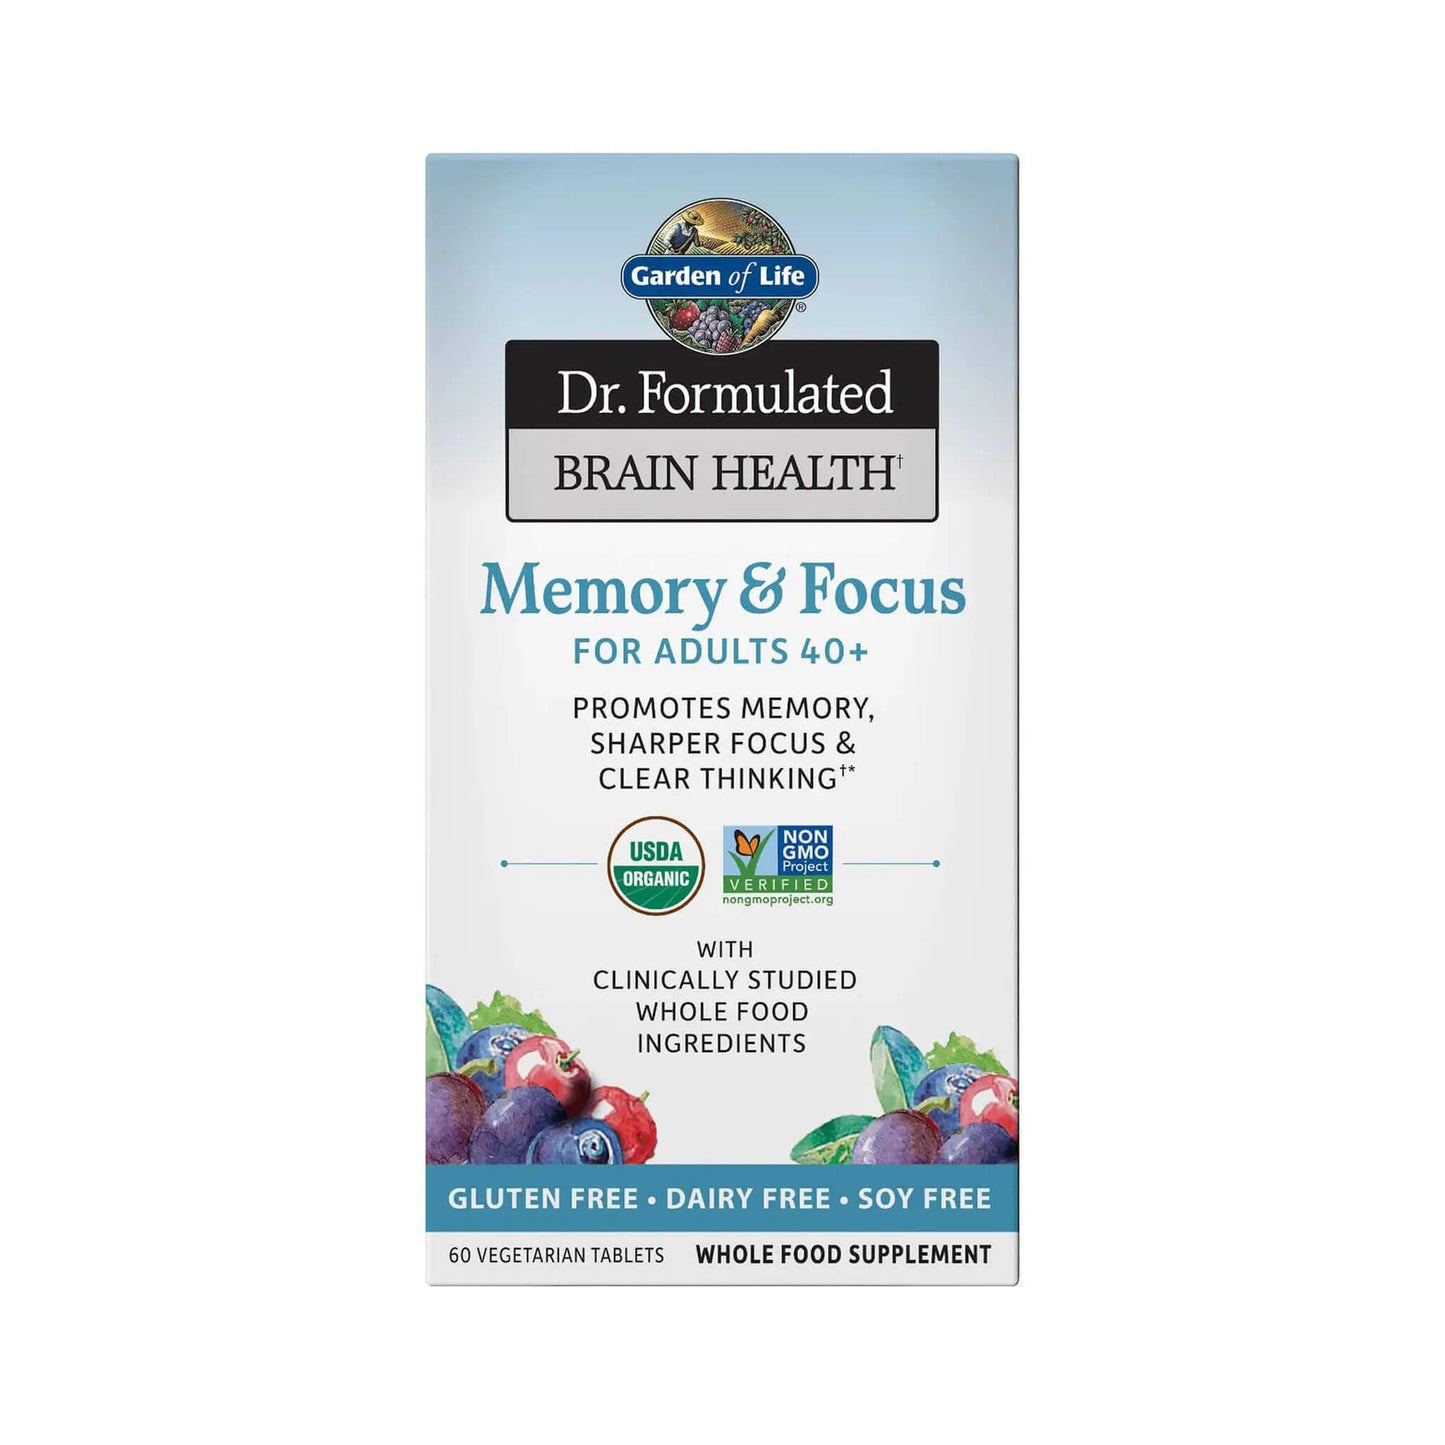 Garden of Life, Memory & Focus for Adults 40+ - 60 vegetarian tablets